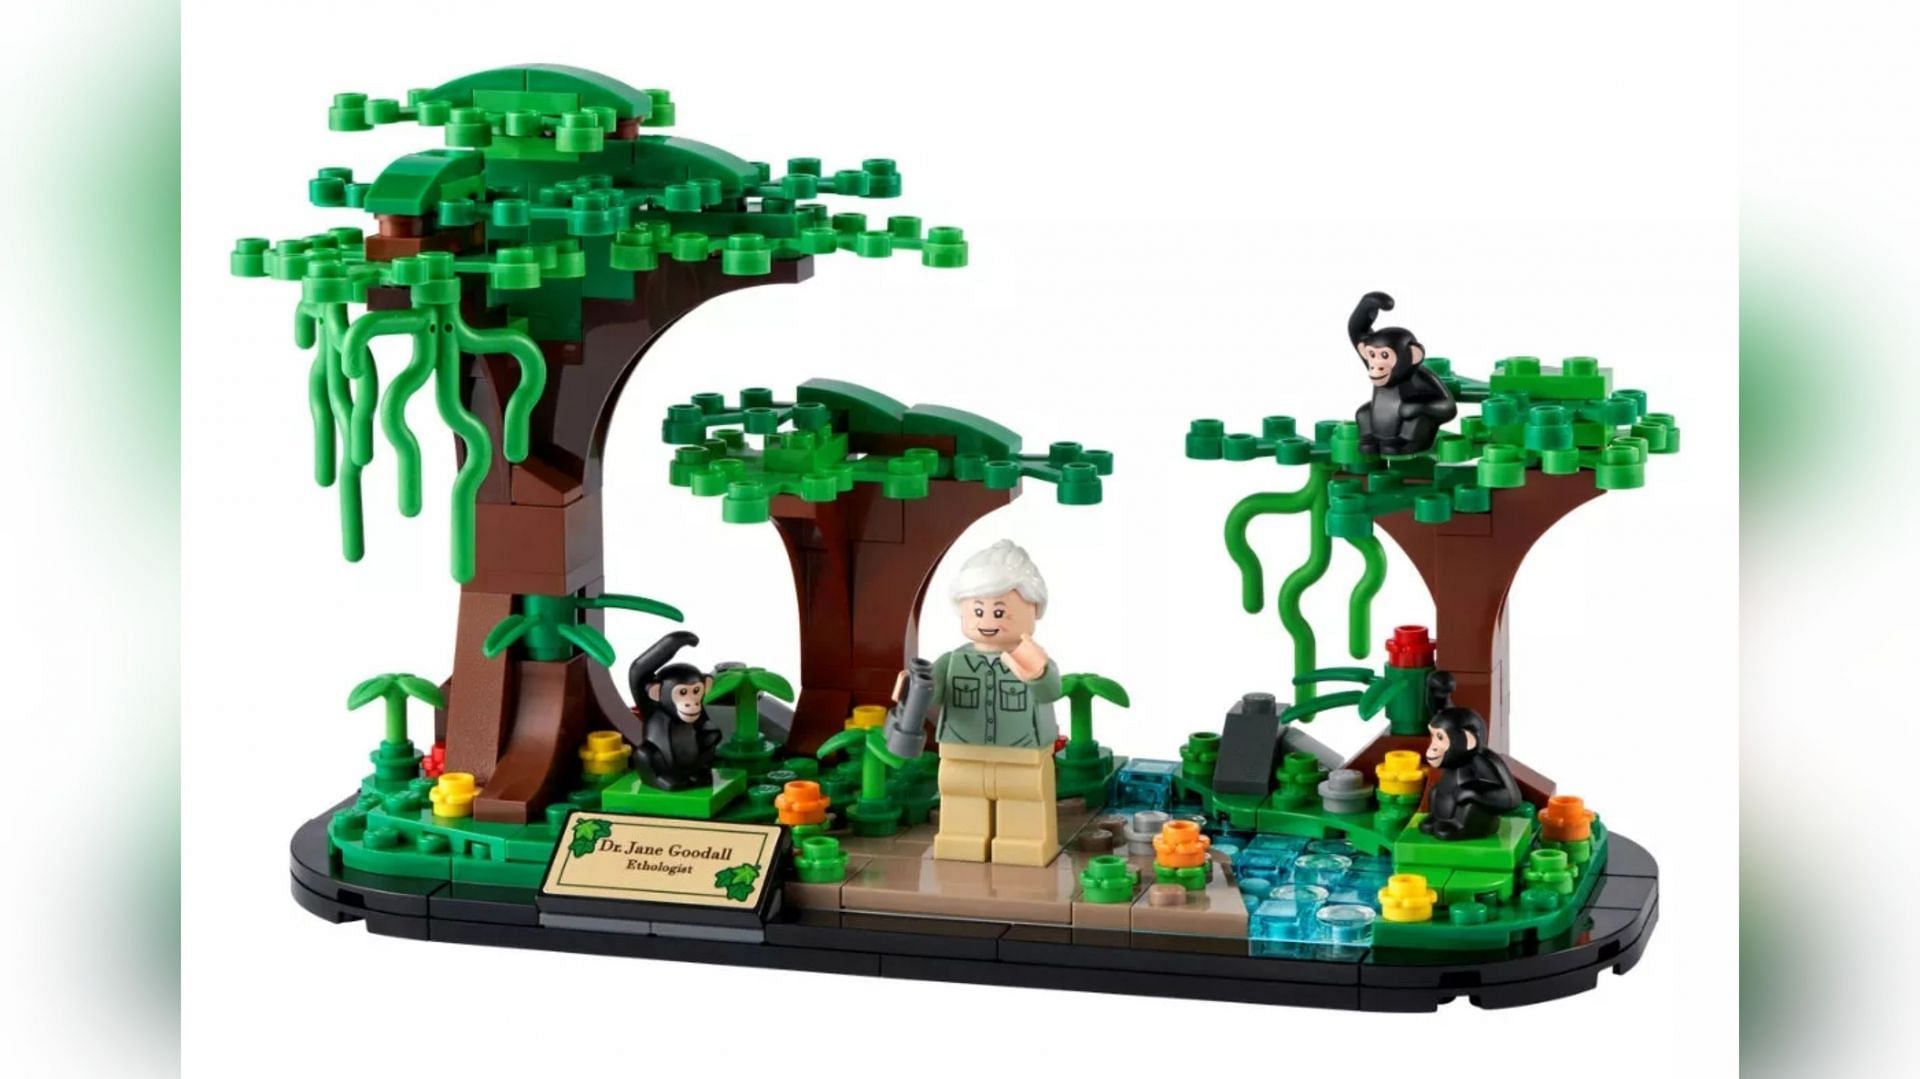 Jane Goodall themed LEGO set is available until March 15, 2022 (Image via LEGO)